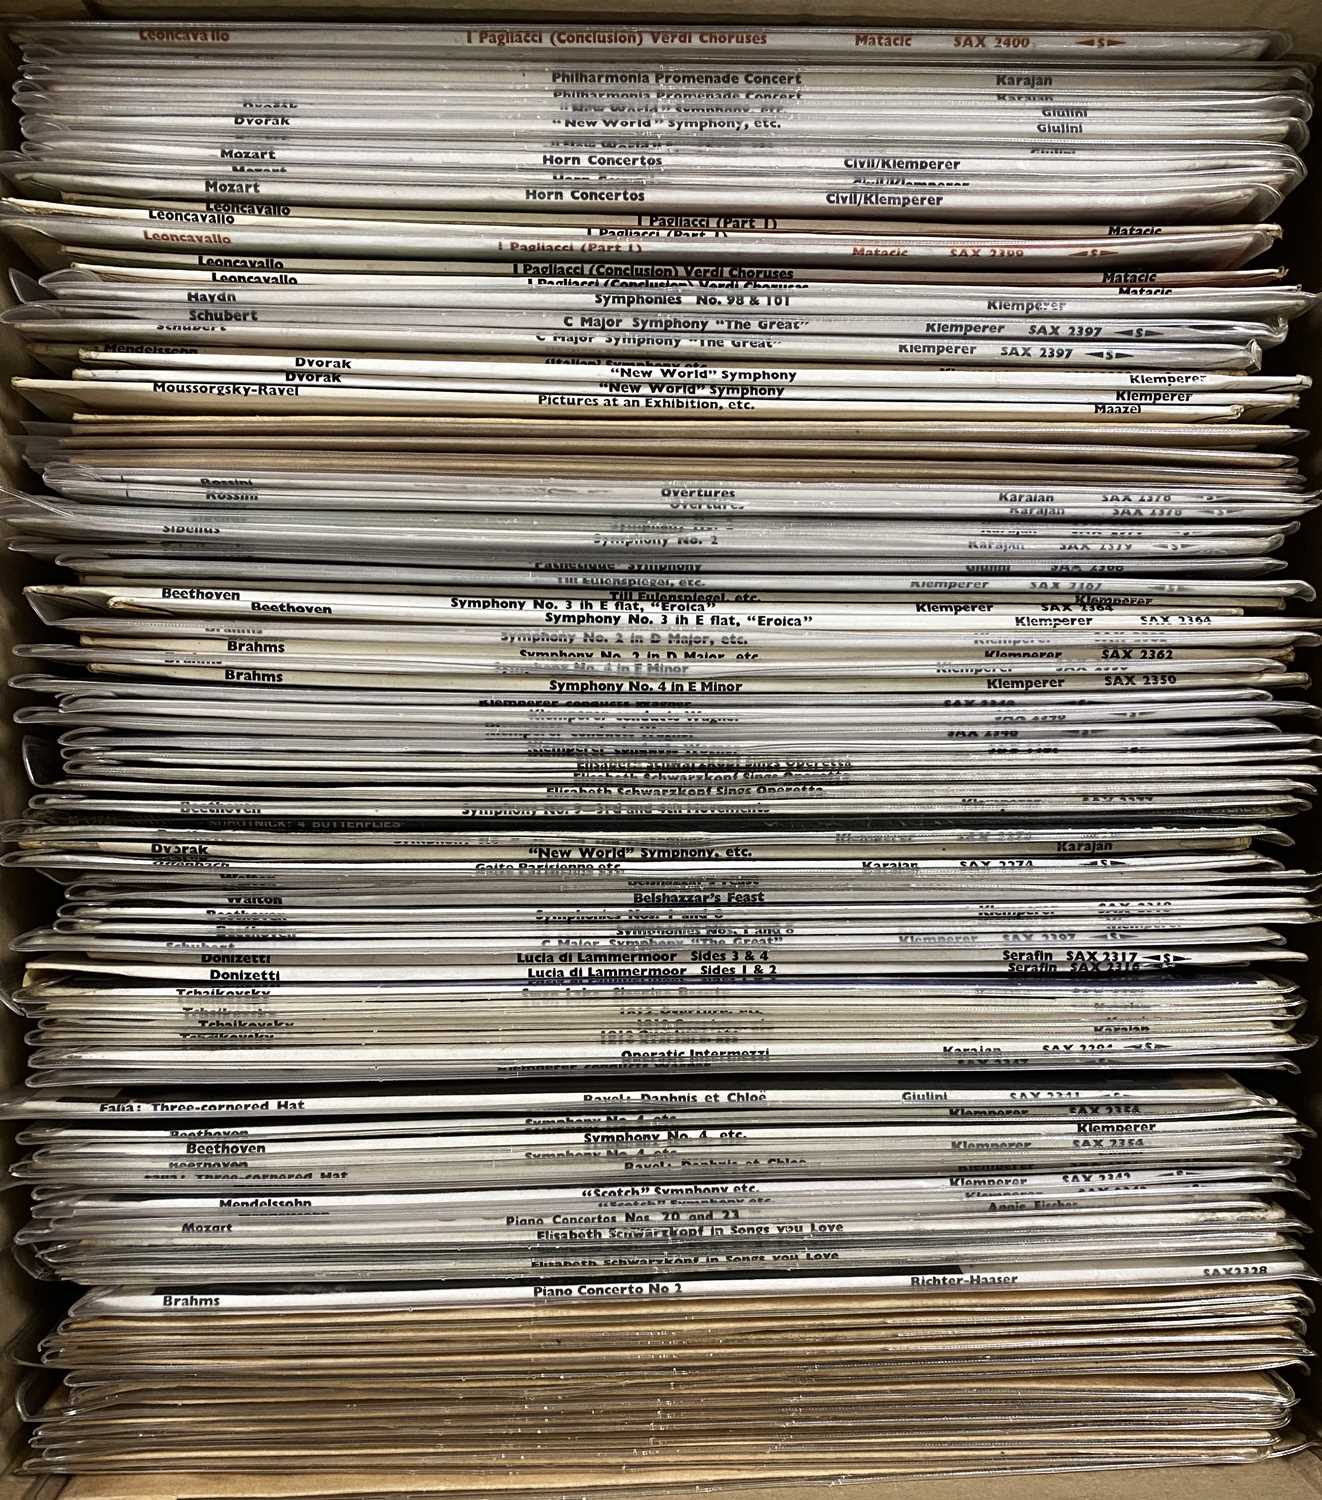 Lot 283 - CLASSICAL - COLUMBIA 'SAX' STEREO LP COLLECTION